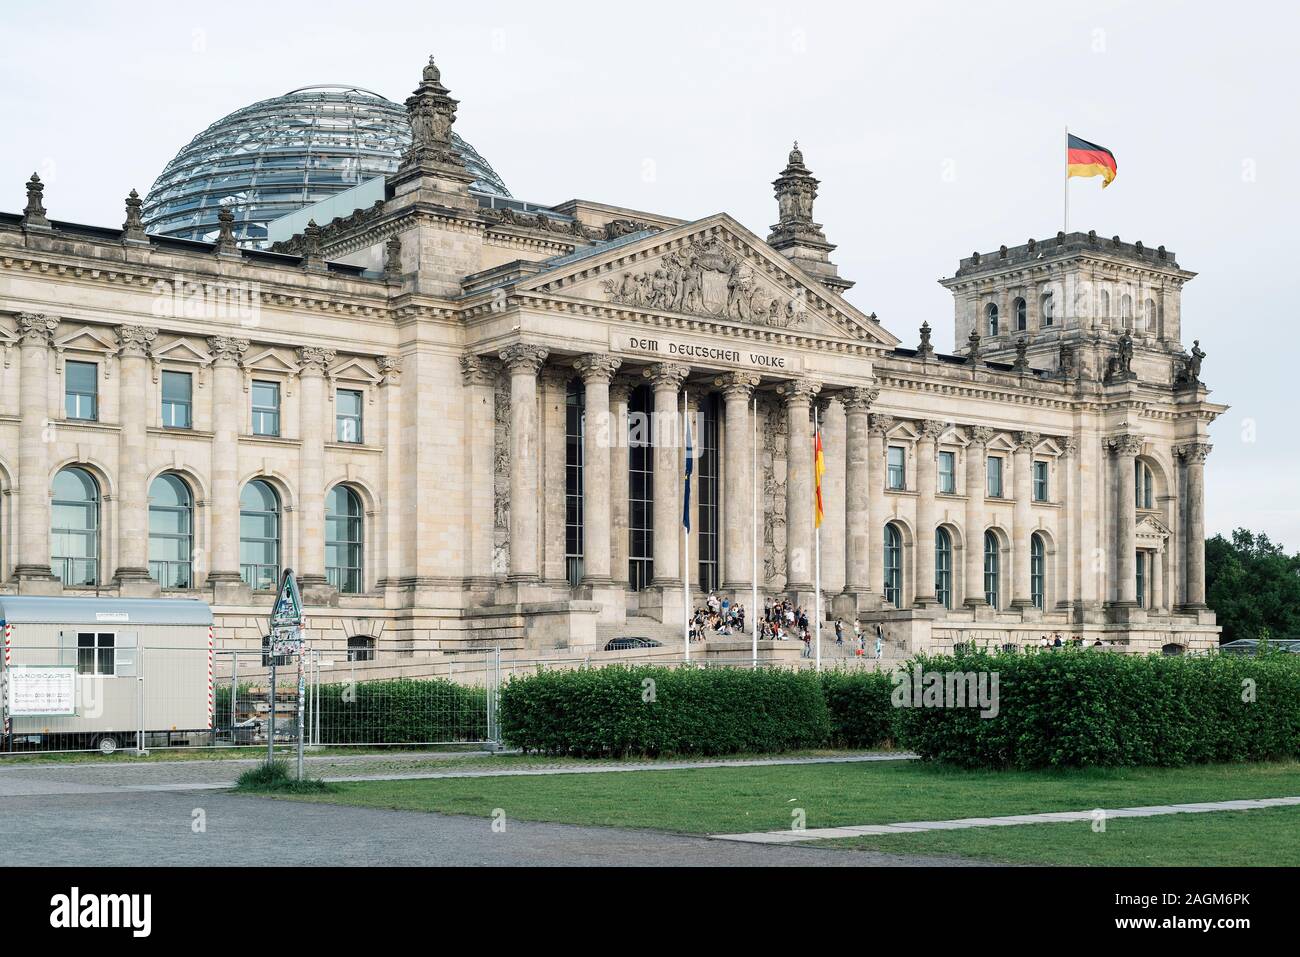 BERLIN, GERMANY - MAY 23, 2018: A view of the main facade of the Reichstag building in Berlin, Germany, with some visitors in the staircase, seen from Stock Photo